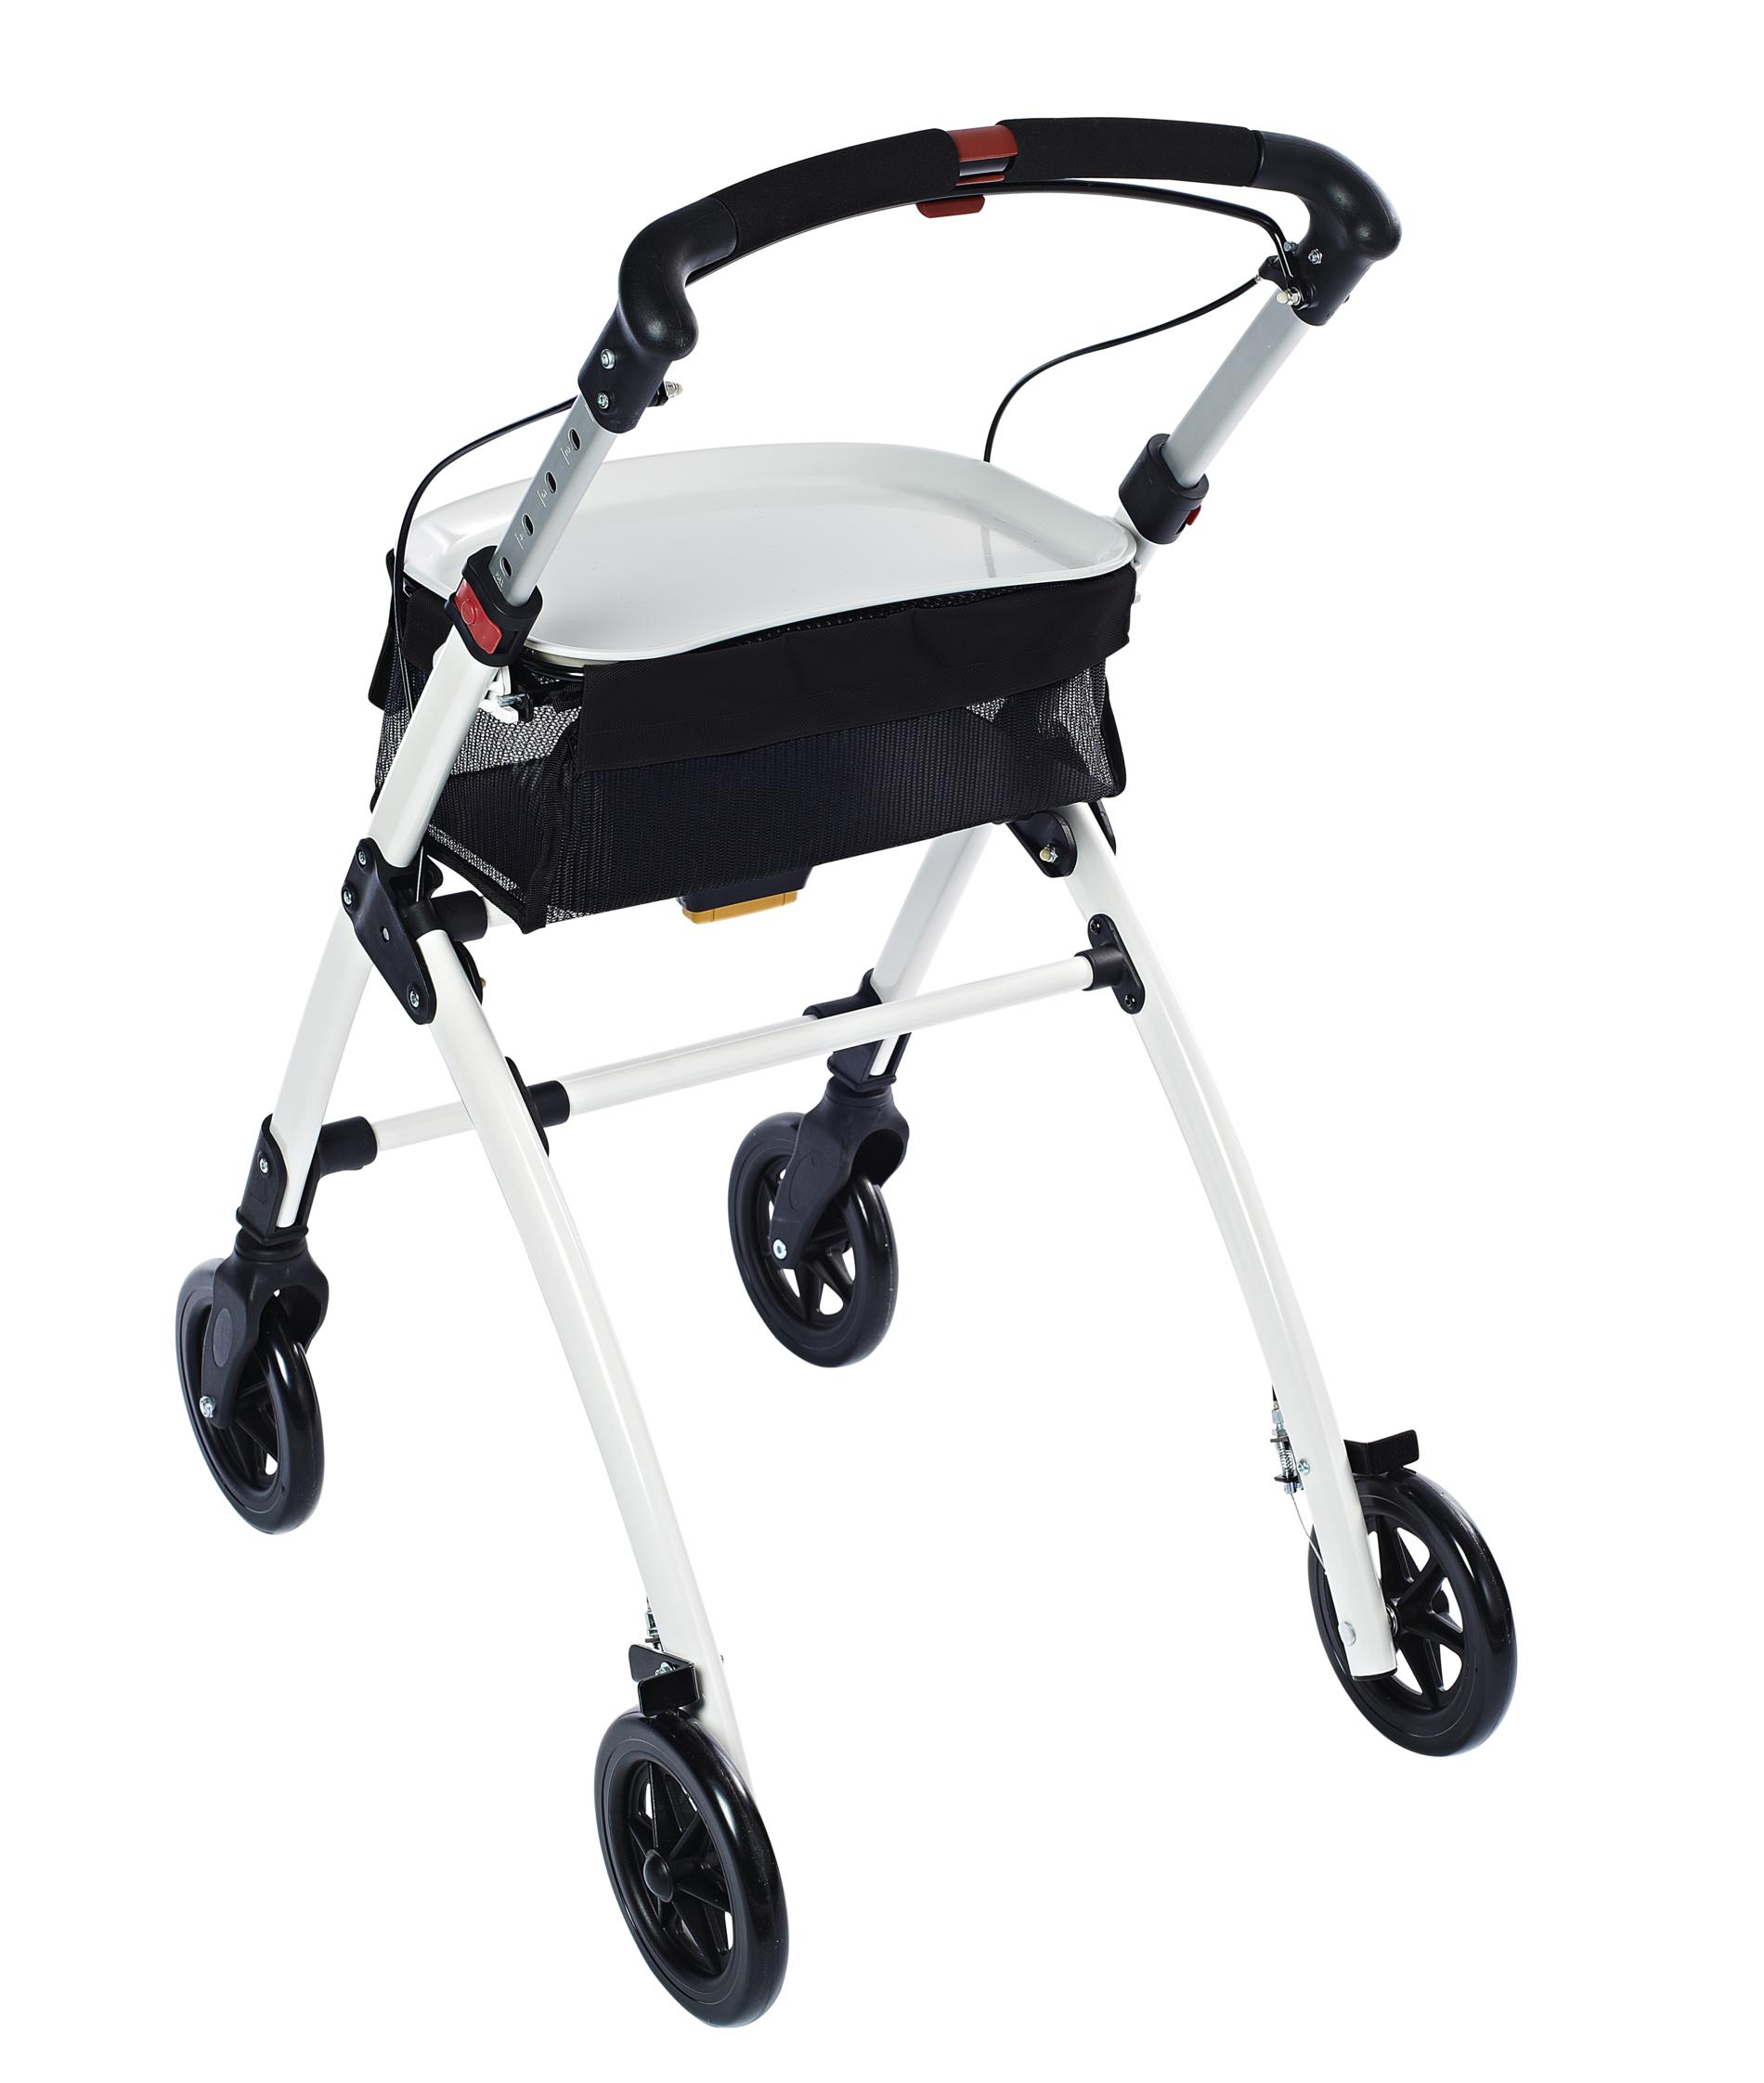 Safe, comfortable and mobile everyday at home - with the RIDDER Indoor  rollator - Ridder Online